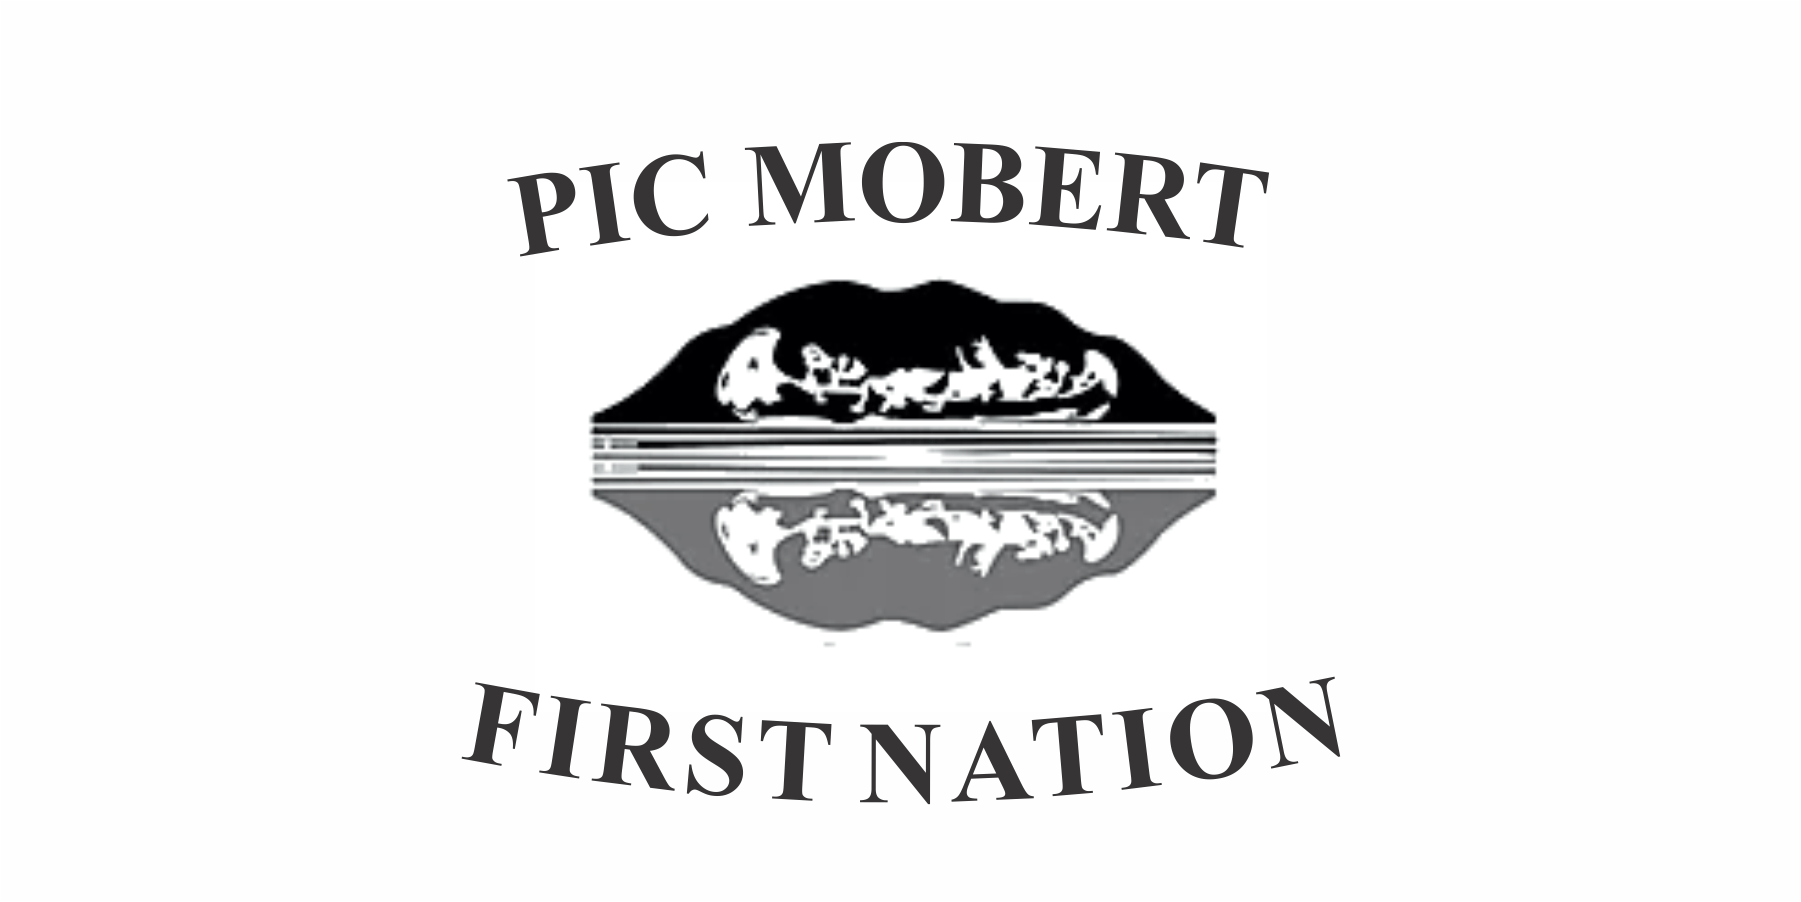 [Pic Mobert First Nation, Ontario flag]